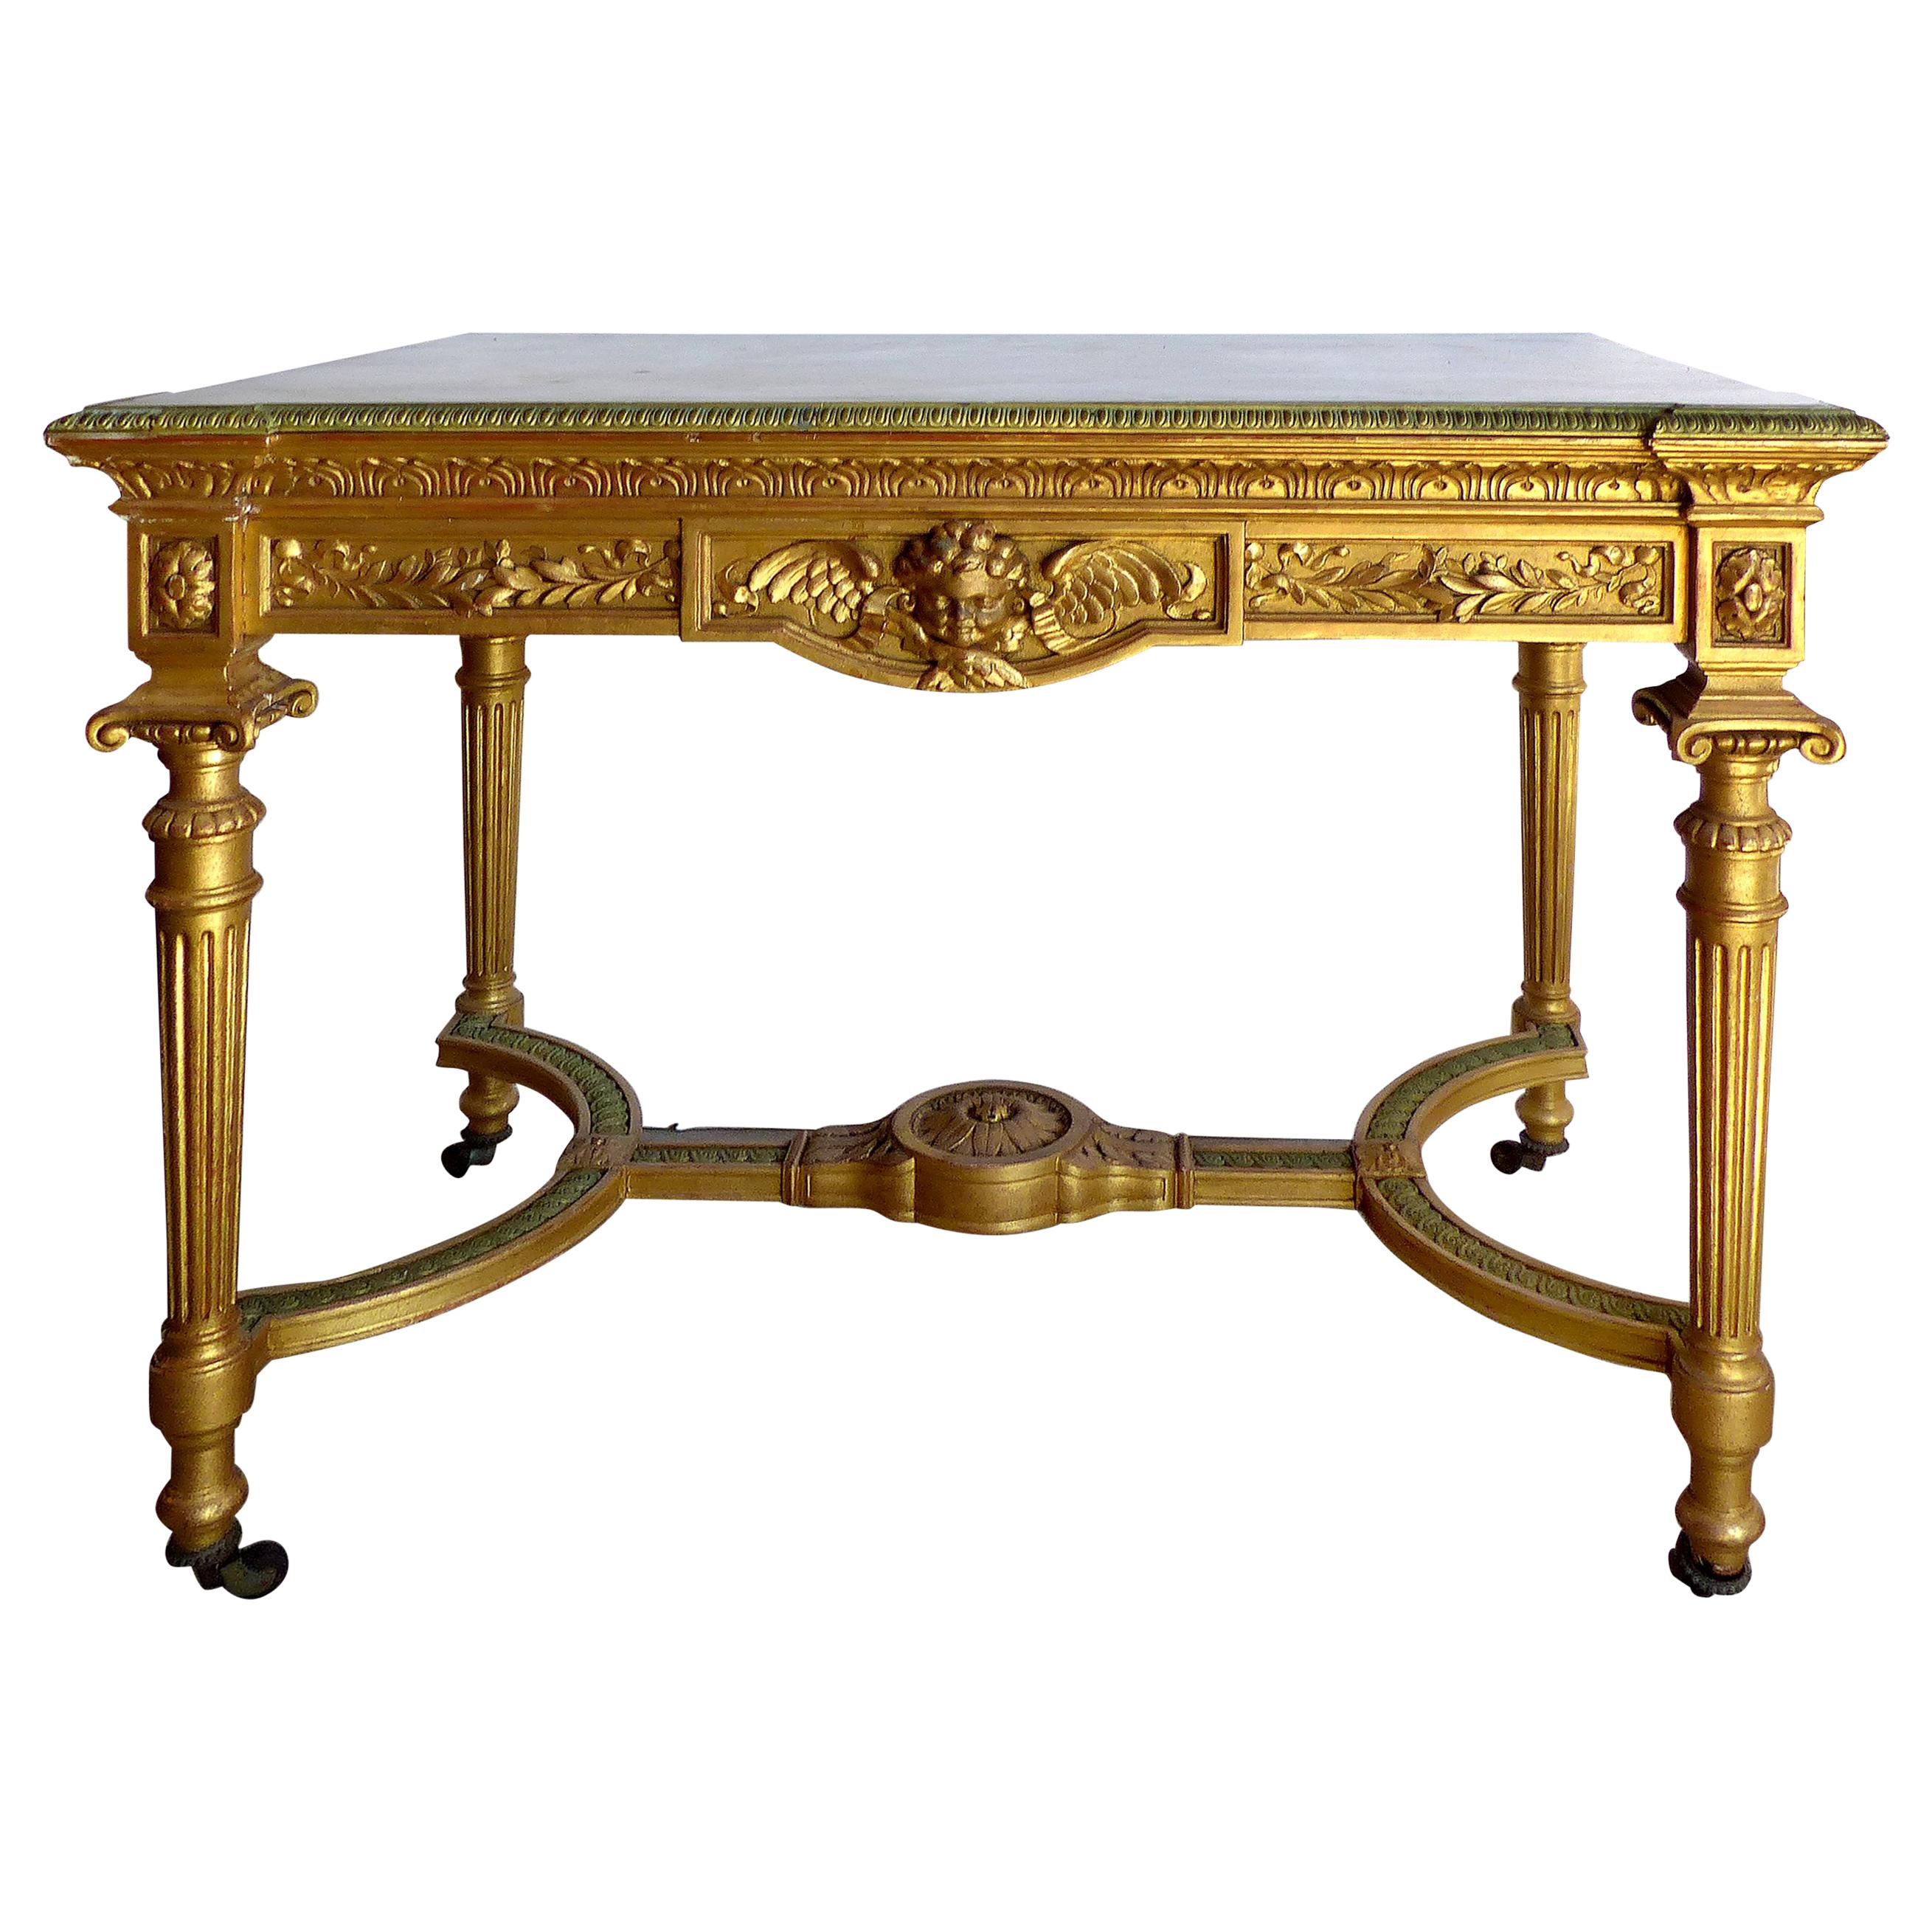 18th Century French Louis XVI Giltwood Console Table with Inset Onyx Top